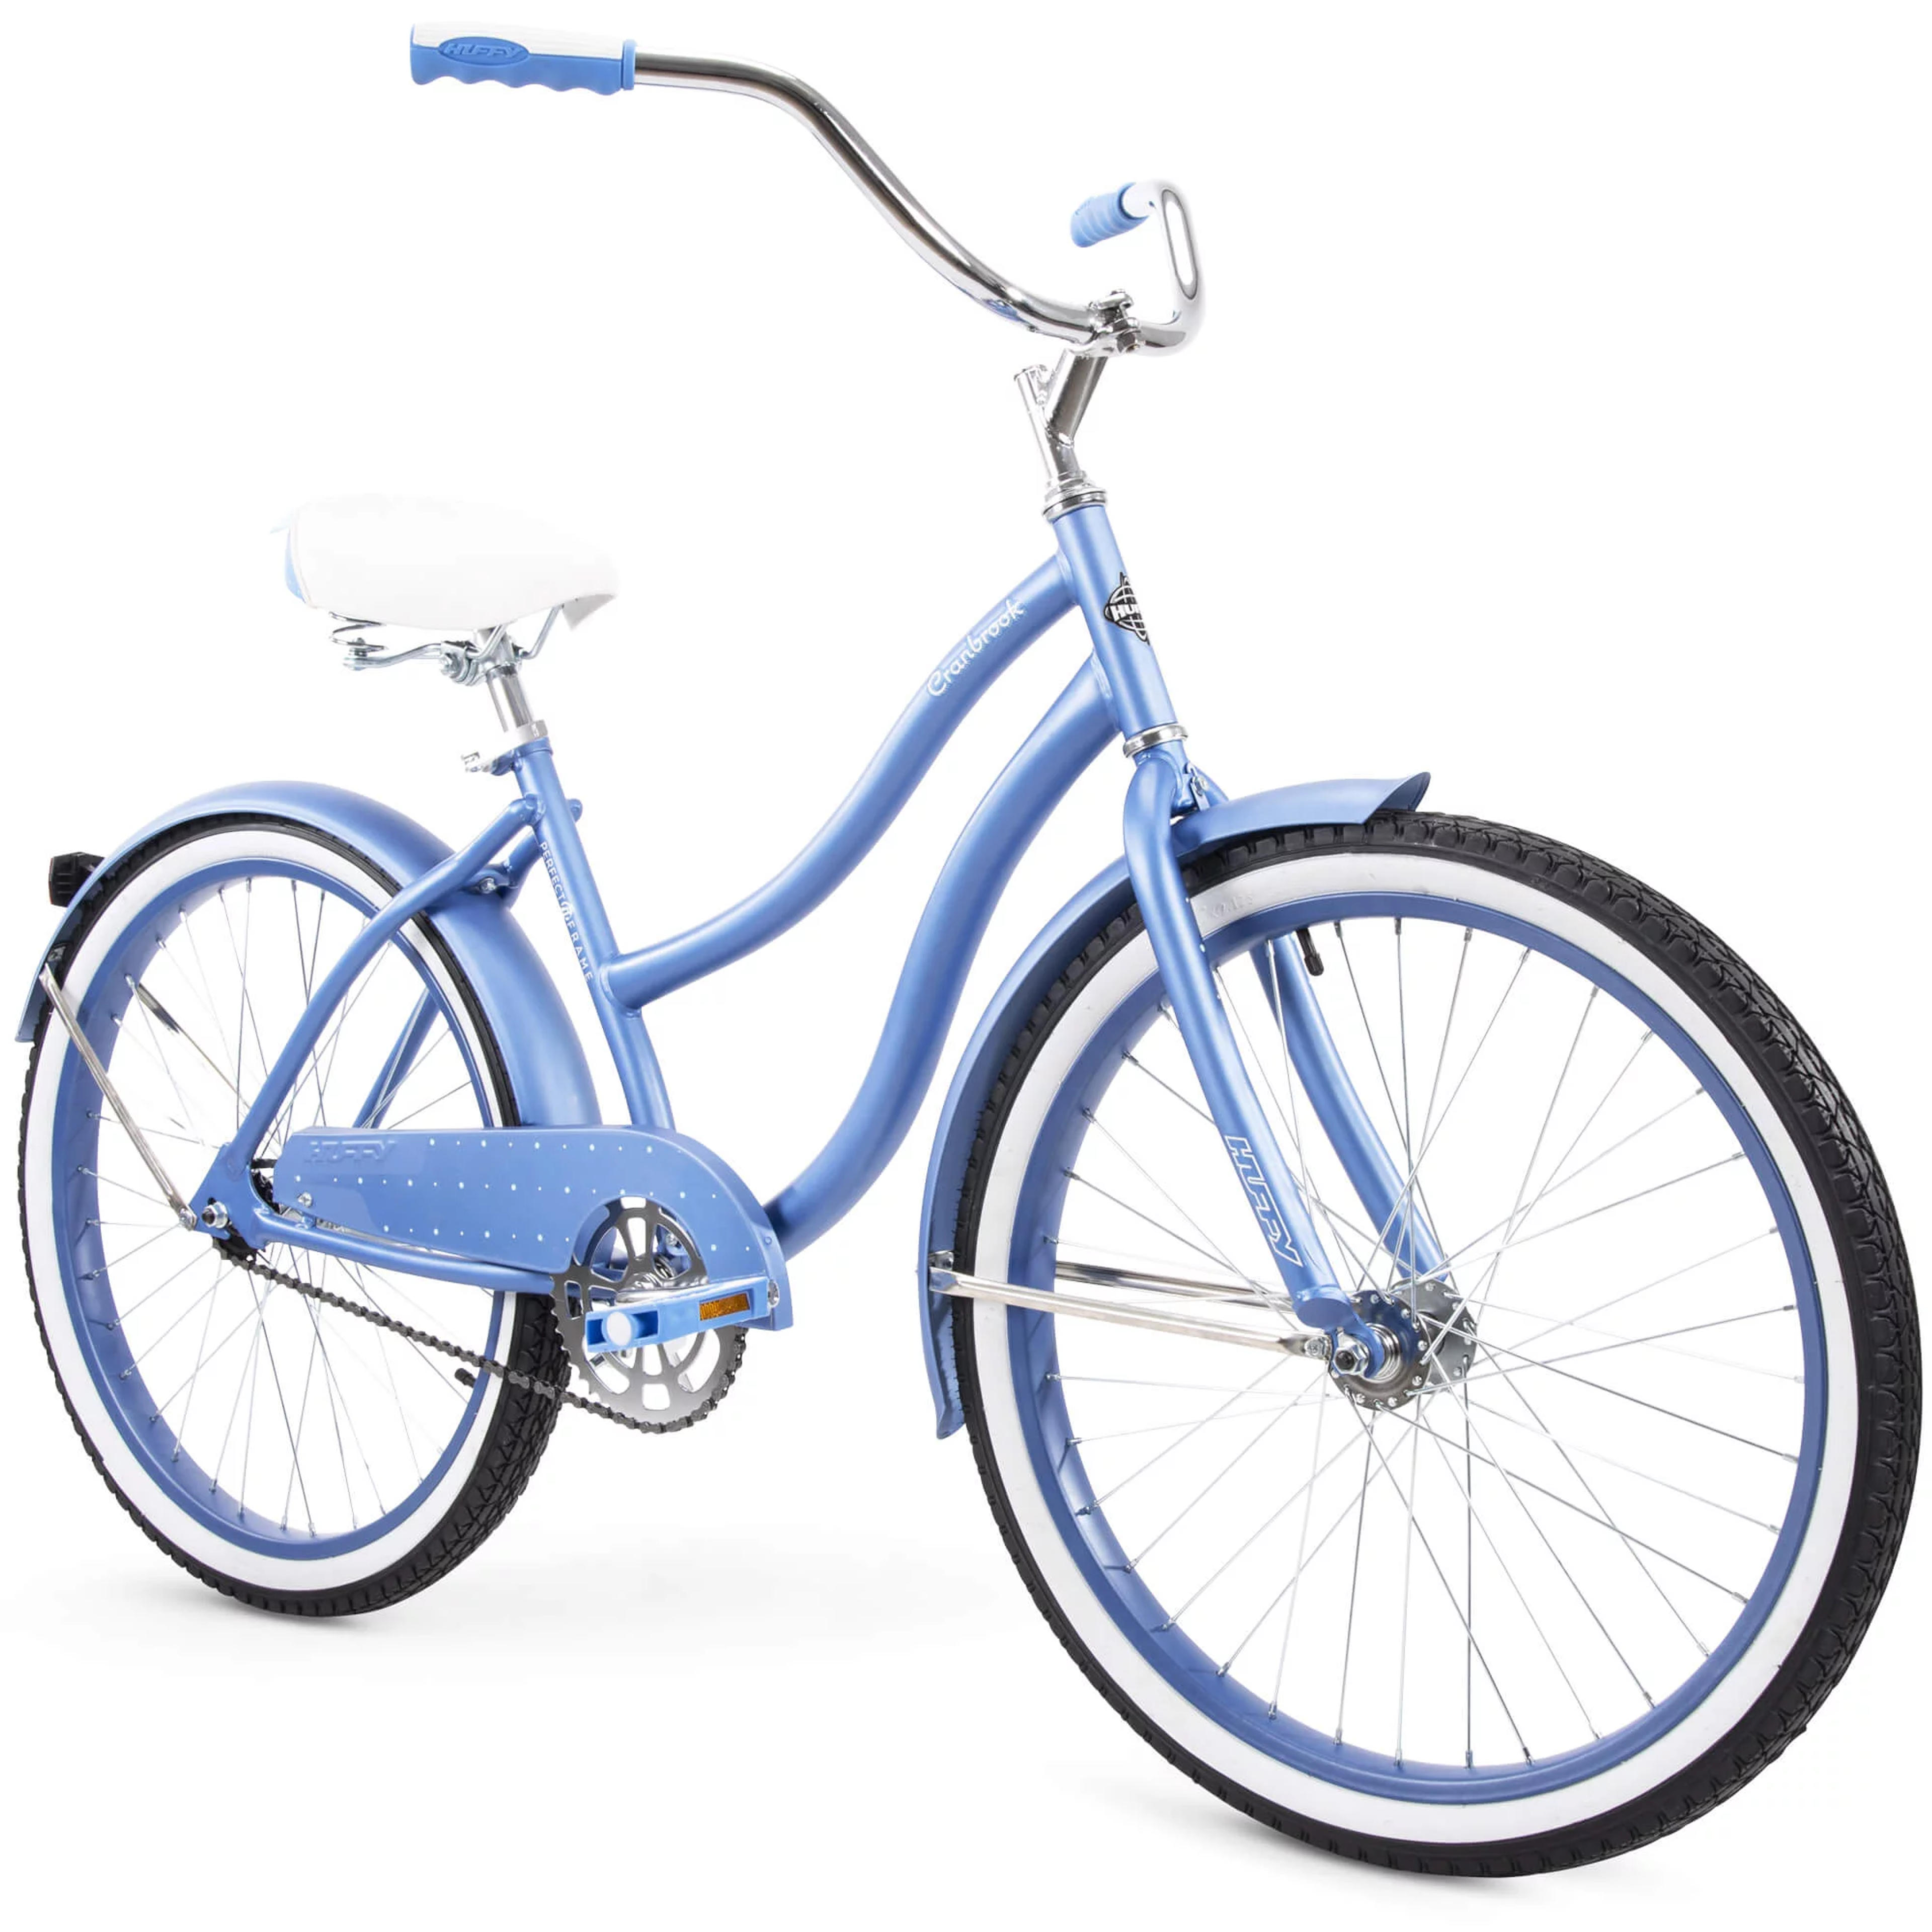 Huffy 24" Cranbrook Girls' Cruiser Bike with Perfect Fit Frame, Periwinkle - Walmart.com